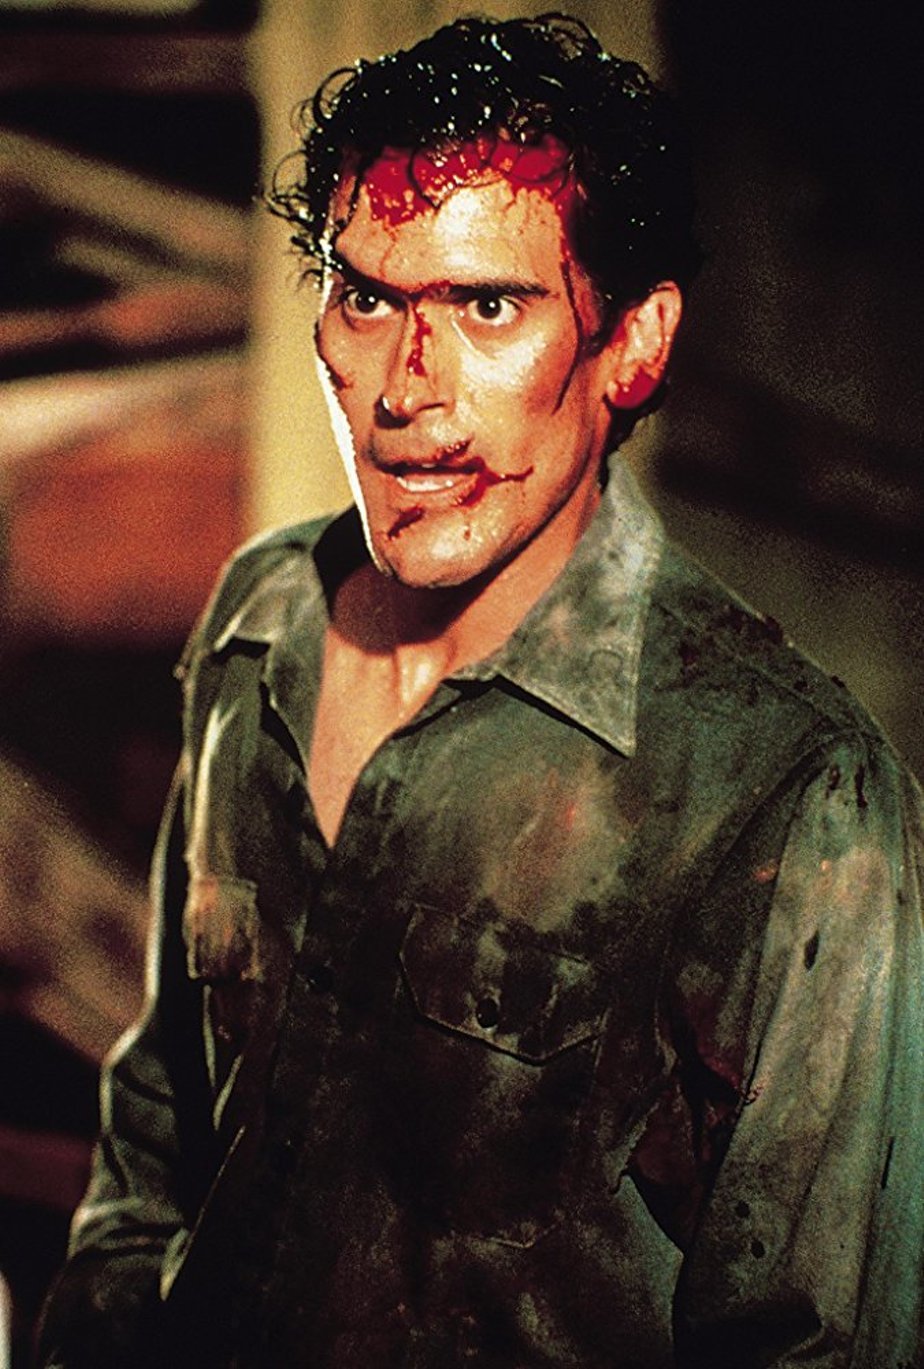 The director of the fourth Evil Dead has been found - Movies, Film and TV series news, Sequel, Bruce Campbell, Evil Dead, Ash vs. the Sinister Dead, Longpost